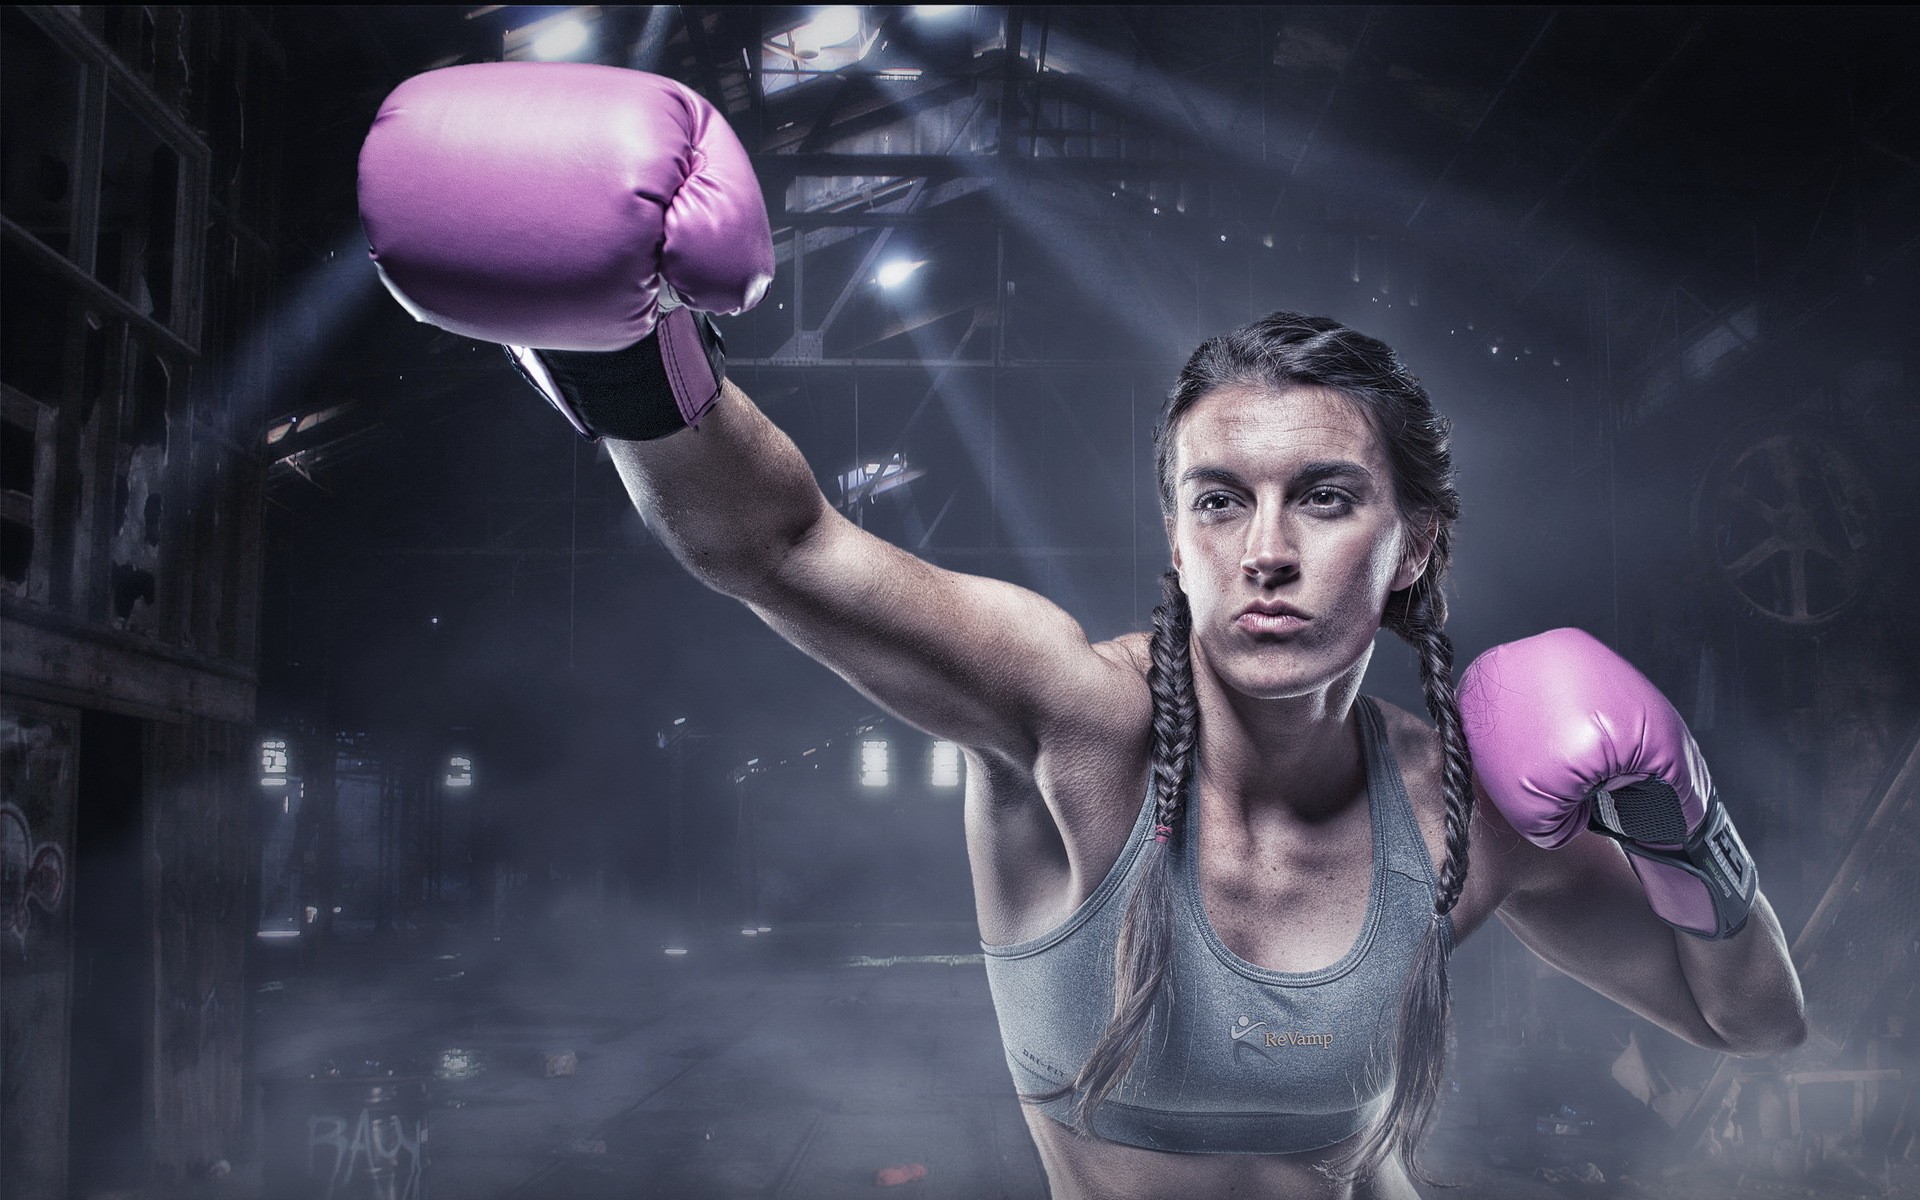 People 1920x1200 boxing women sports bra boxing gloves HDR sun rays sport